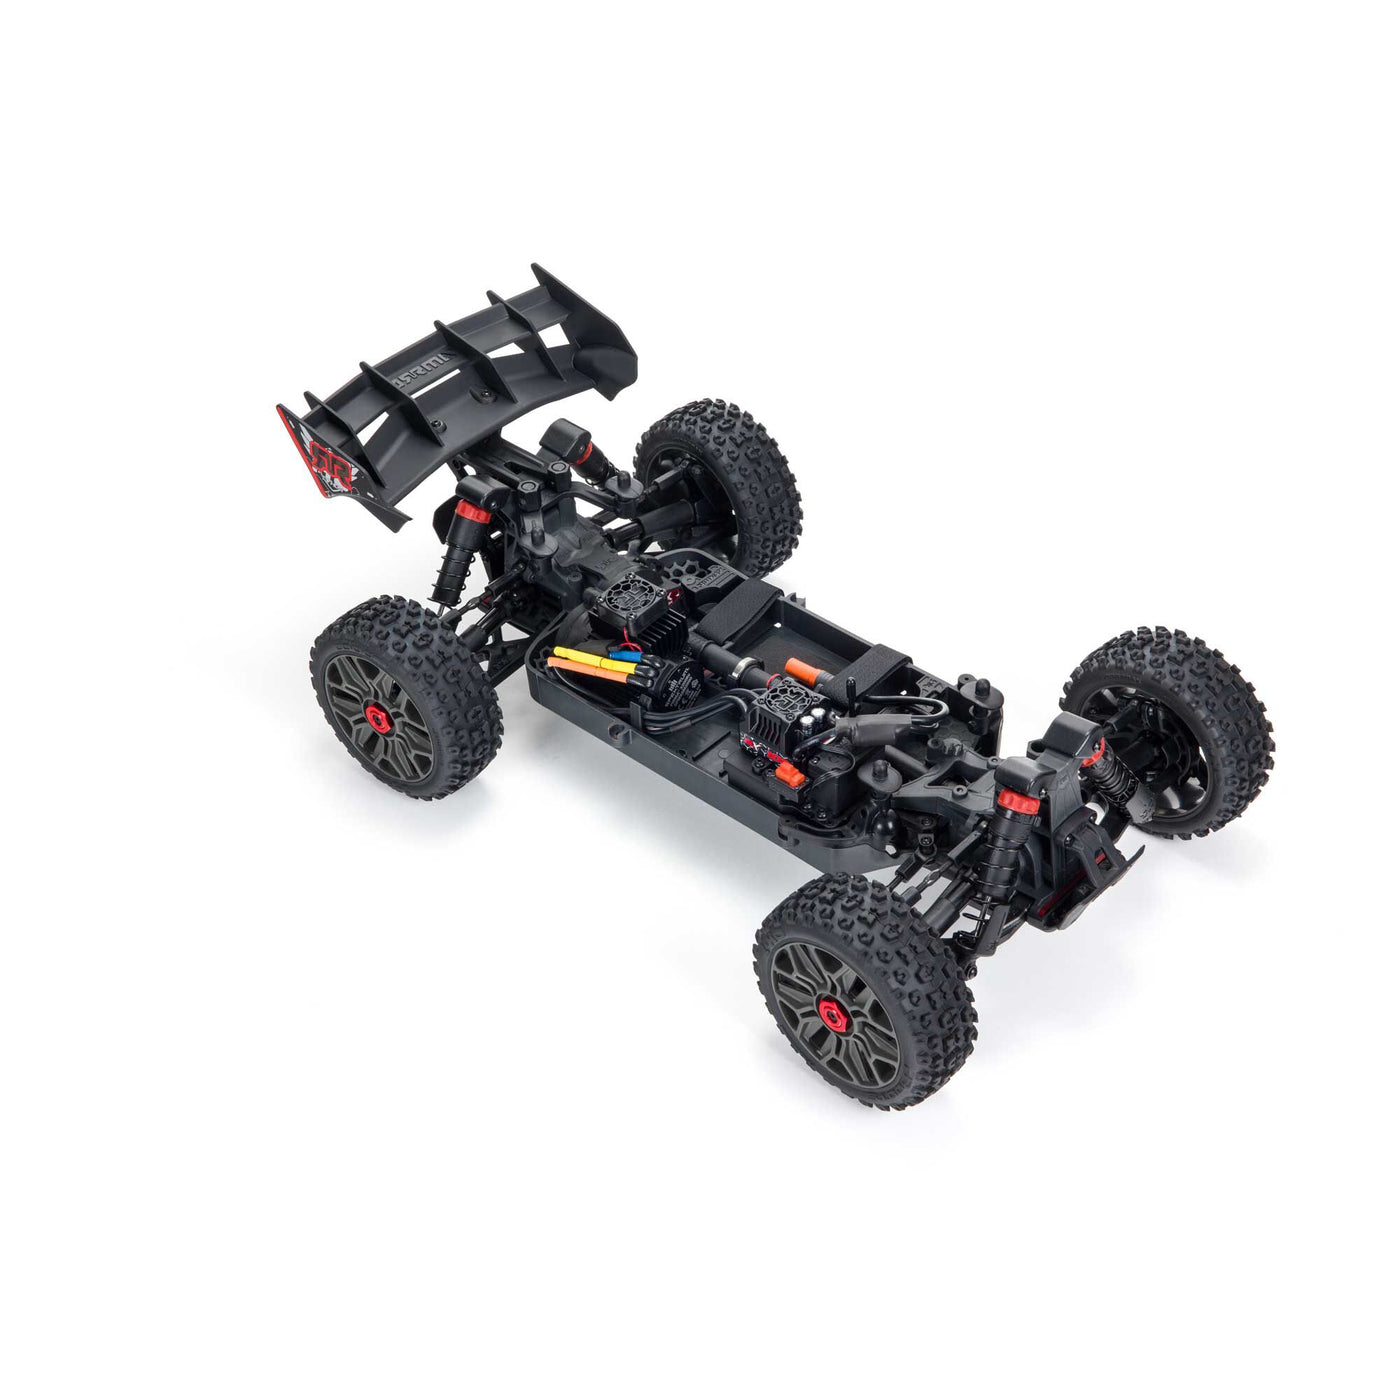 TYPHON 4X4 3S BLX Brushless 1/8th 4wd Buggy Red Arrma ARA4306V3